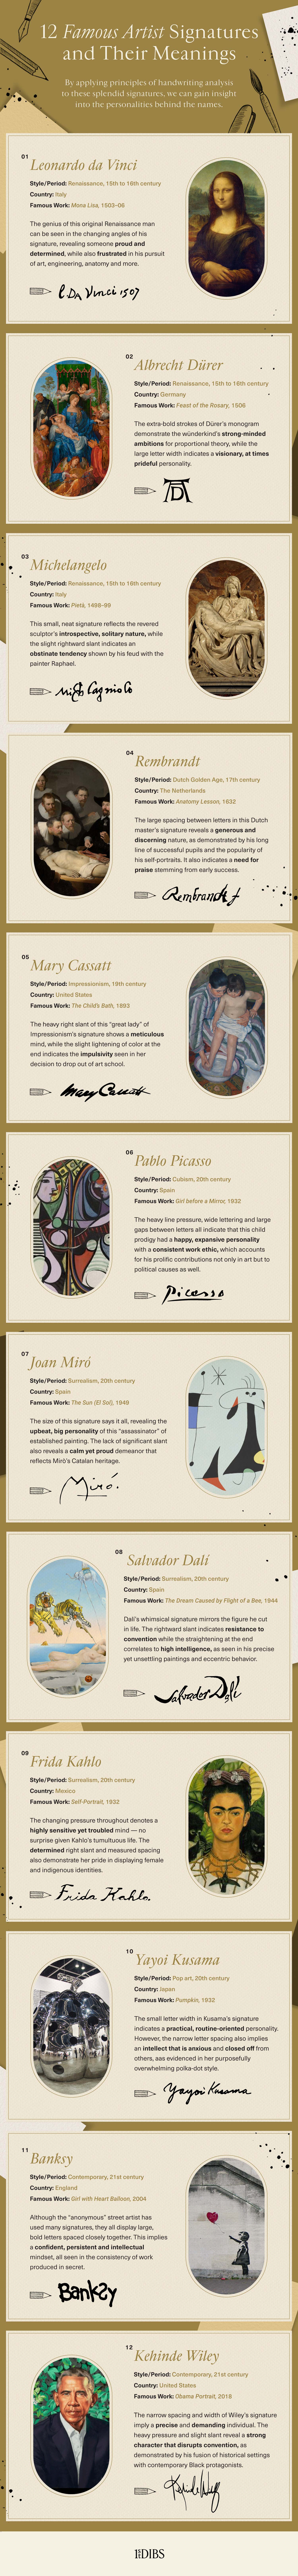 12 Famous Artist Signatures and Their Meaning